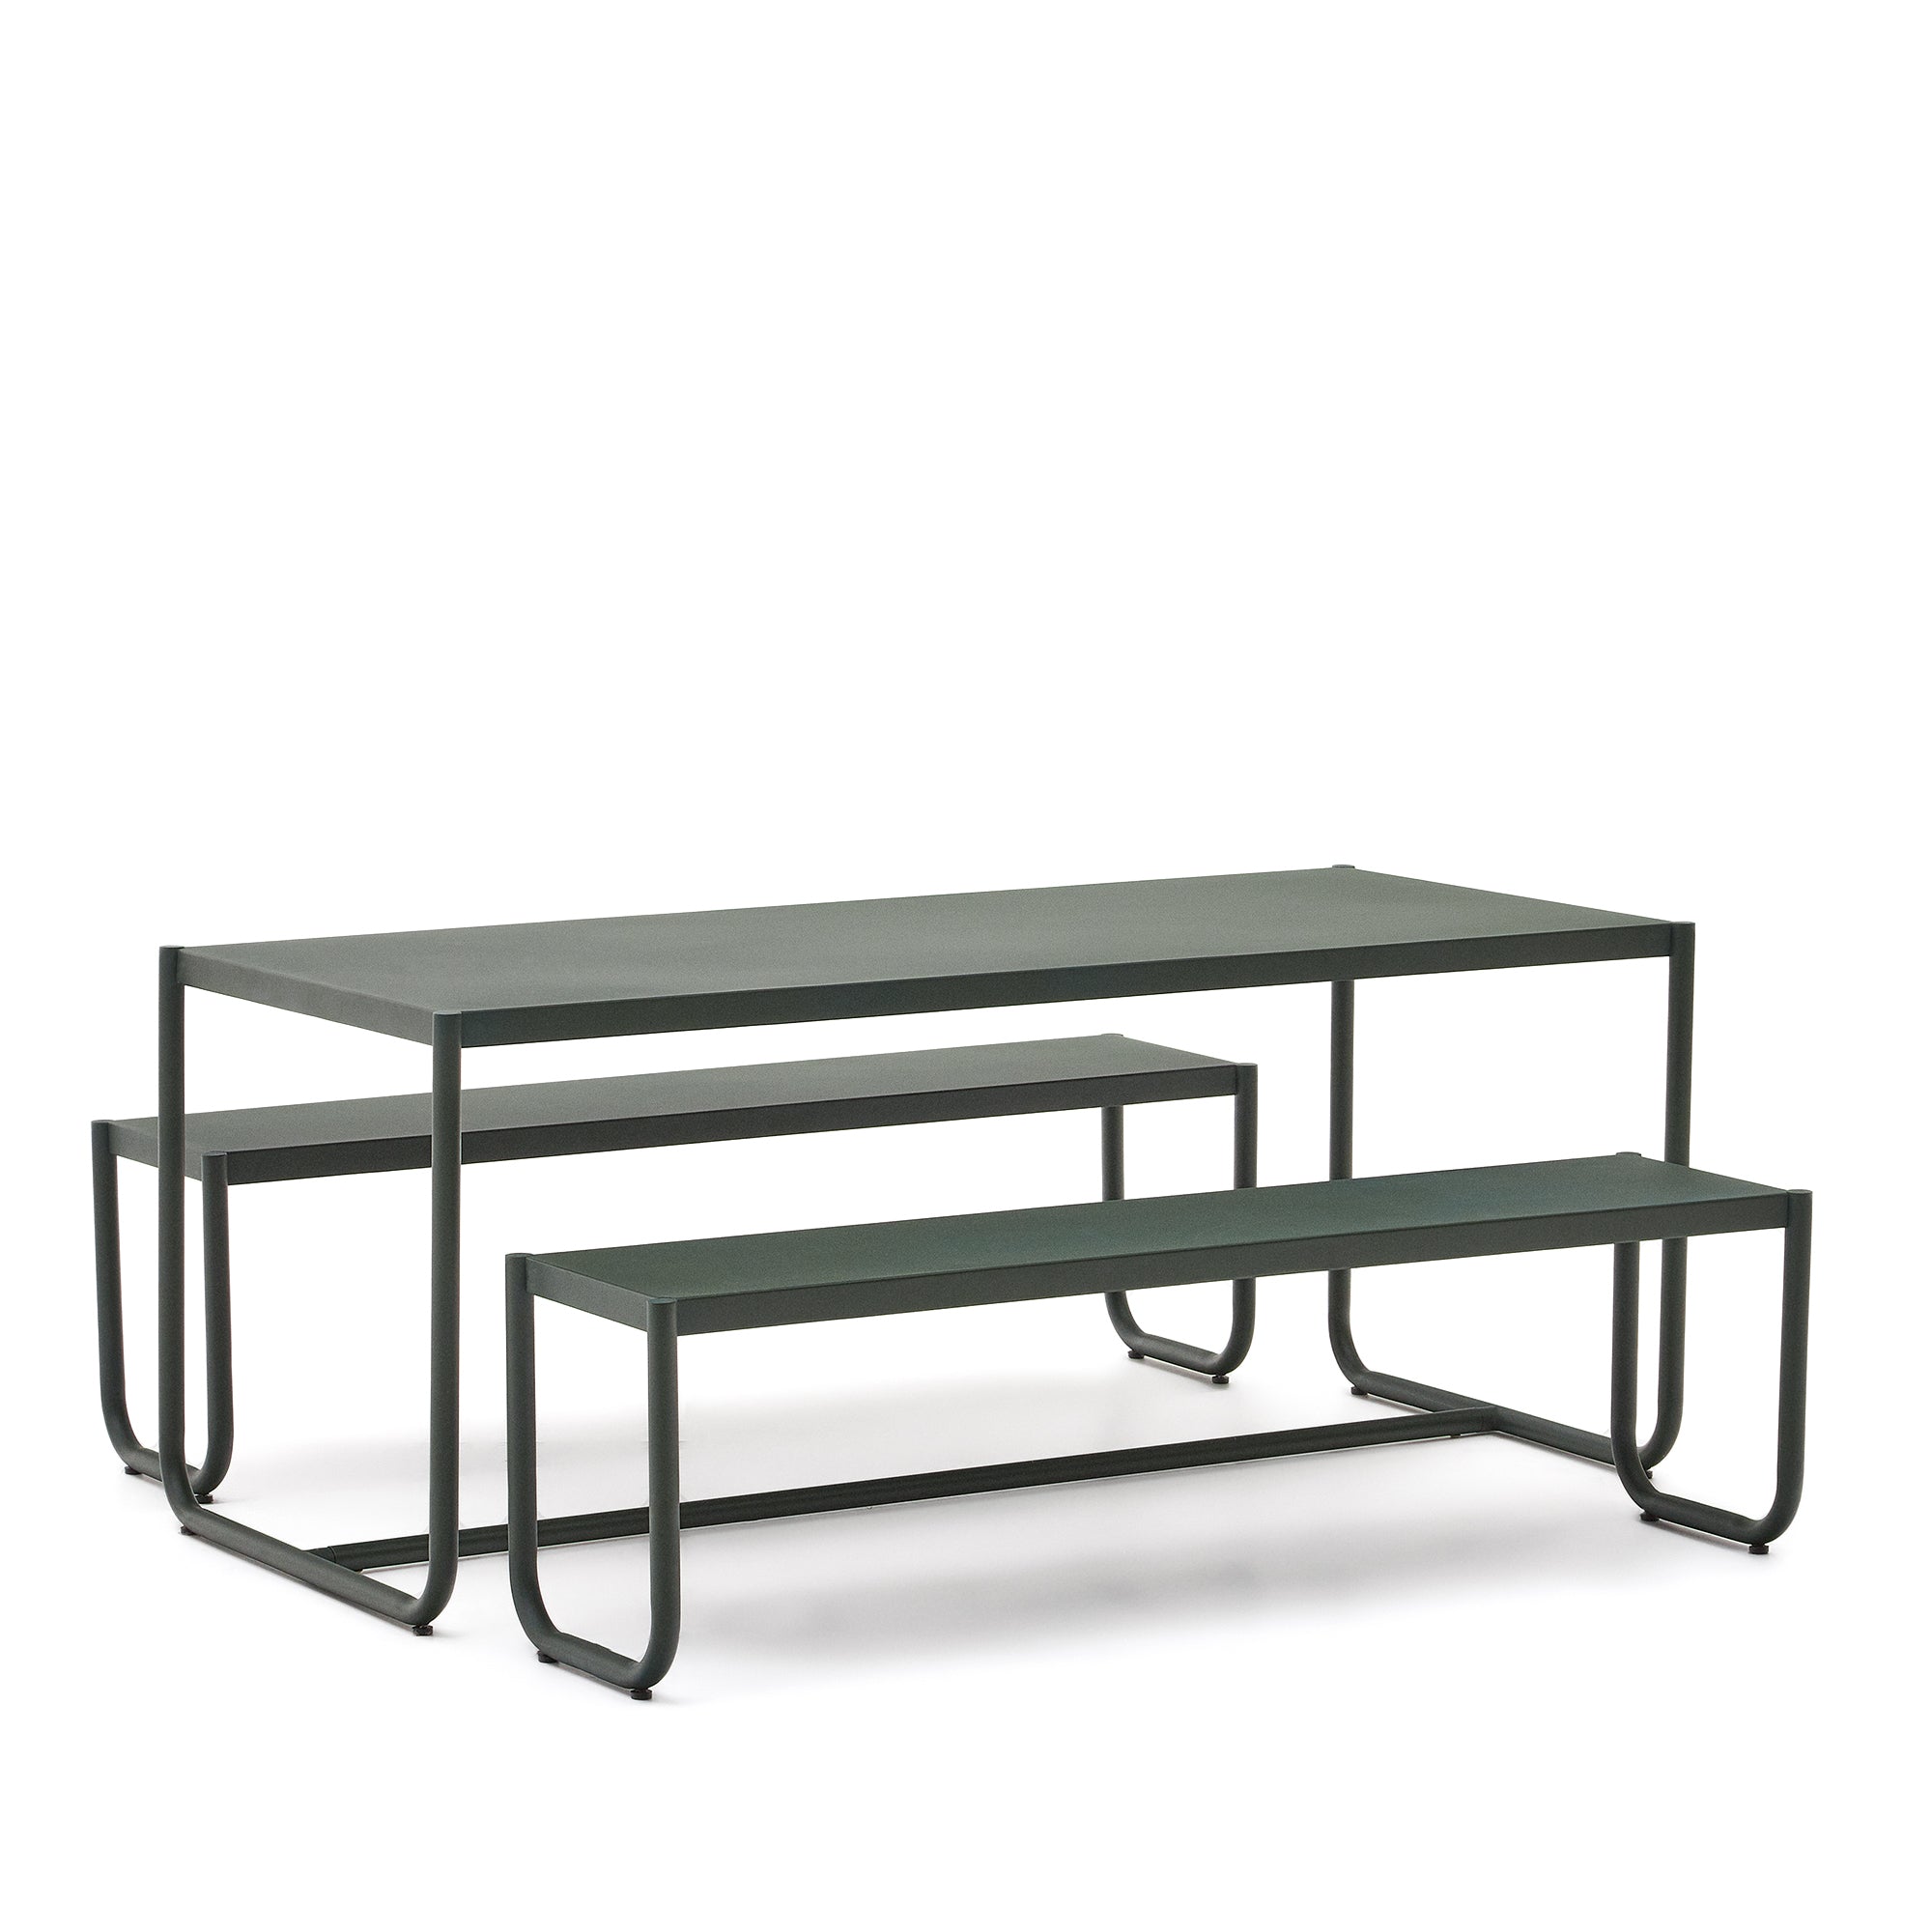 Sotil 2 bench and galvanized steel table set with green finish 183 x 83 cm